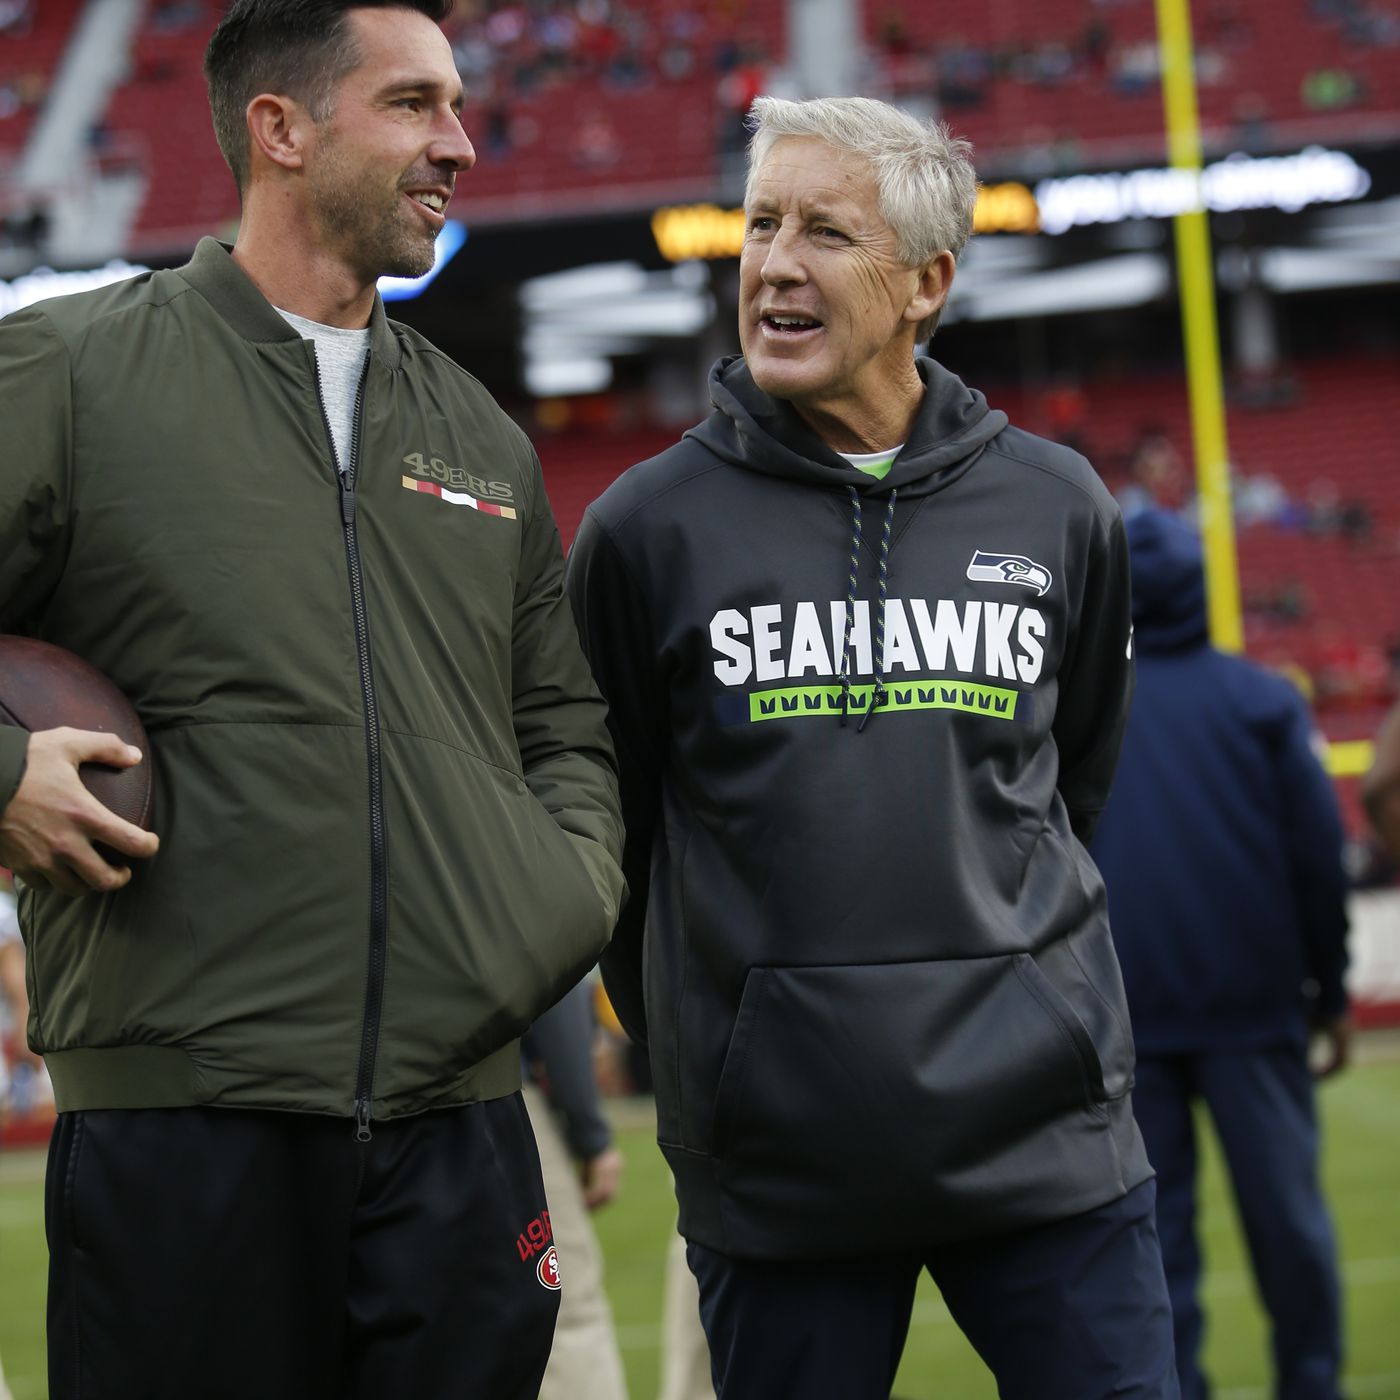 Seahawks vs. 49ers Gameday Info: How to watch, stream Week 15 matchup